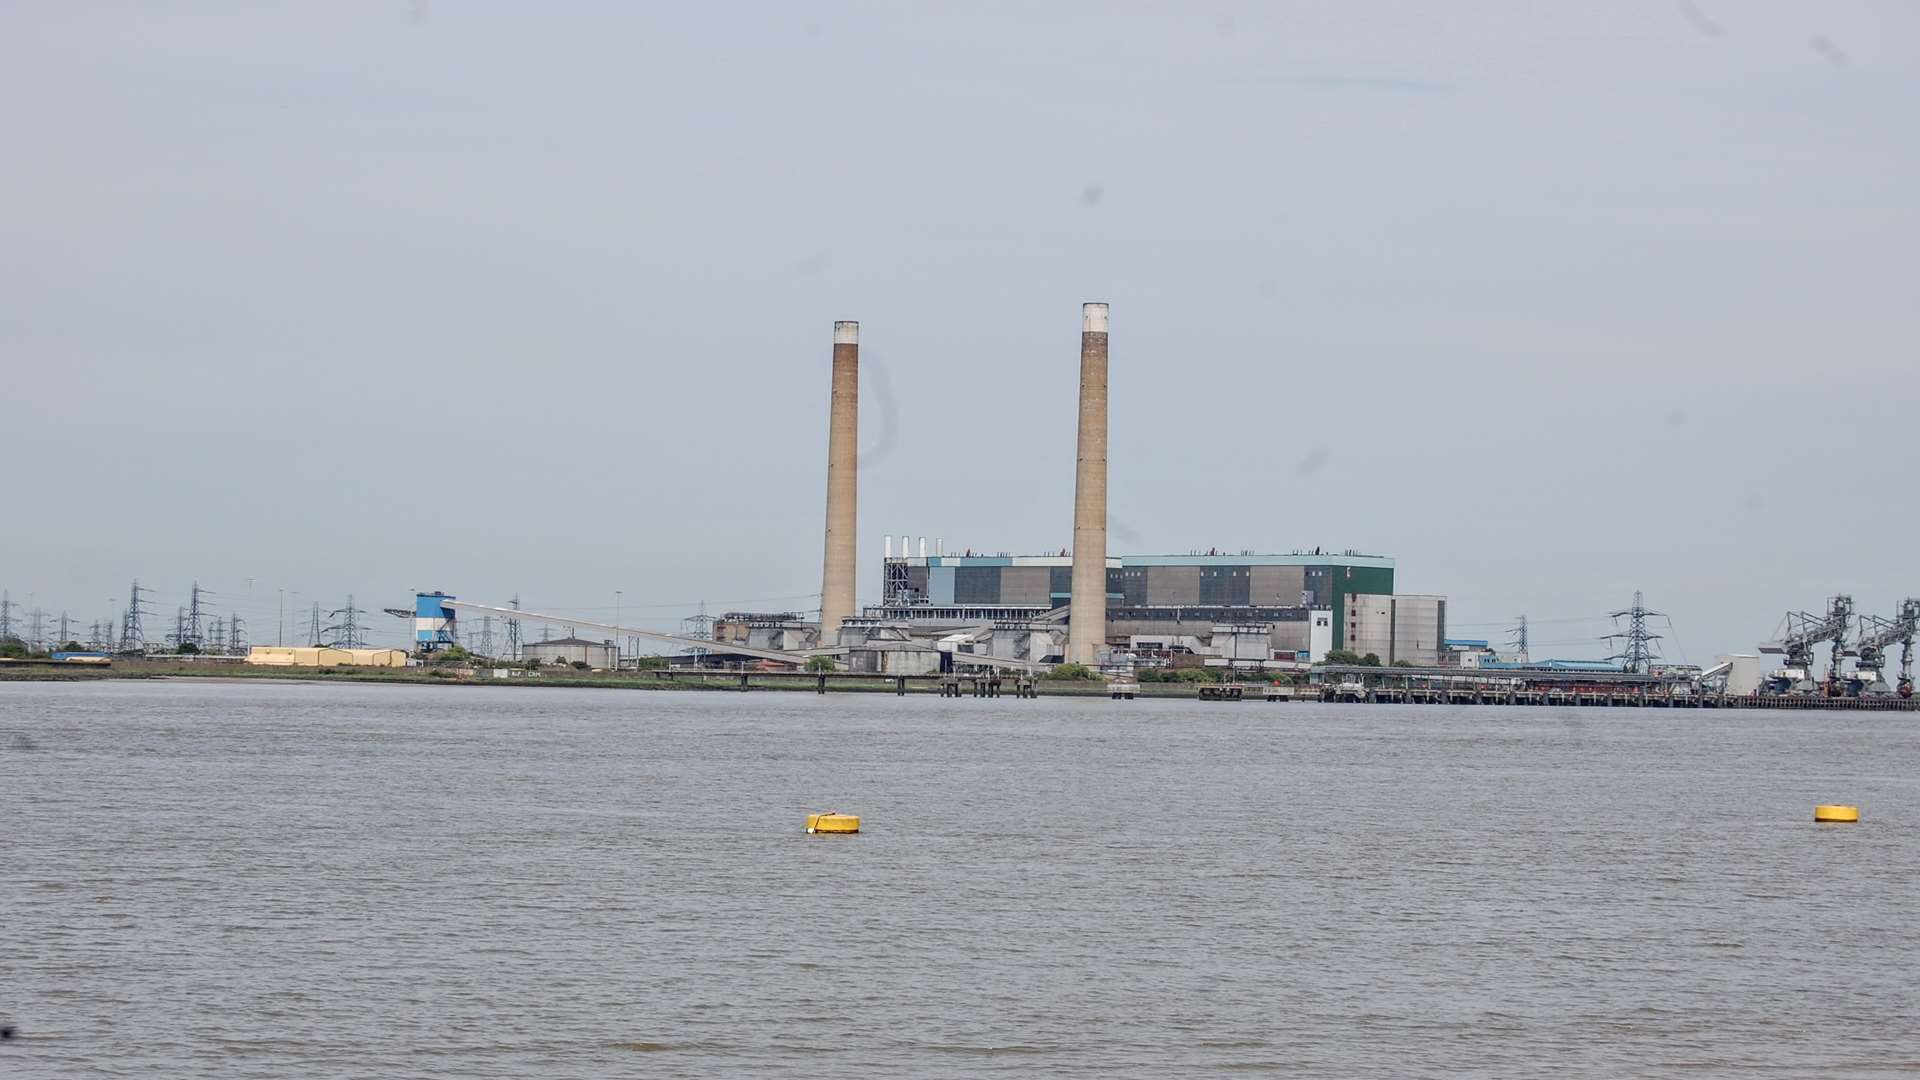 The view of Tilbury Power Station from Gravesend